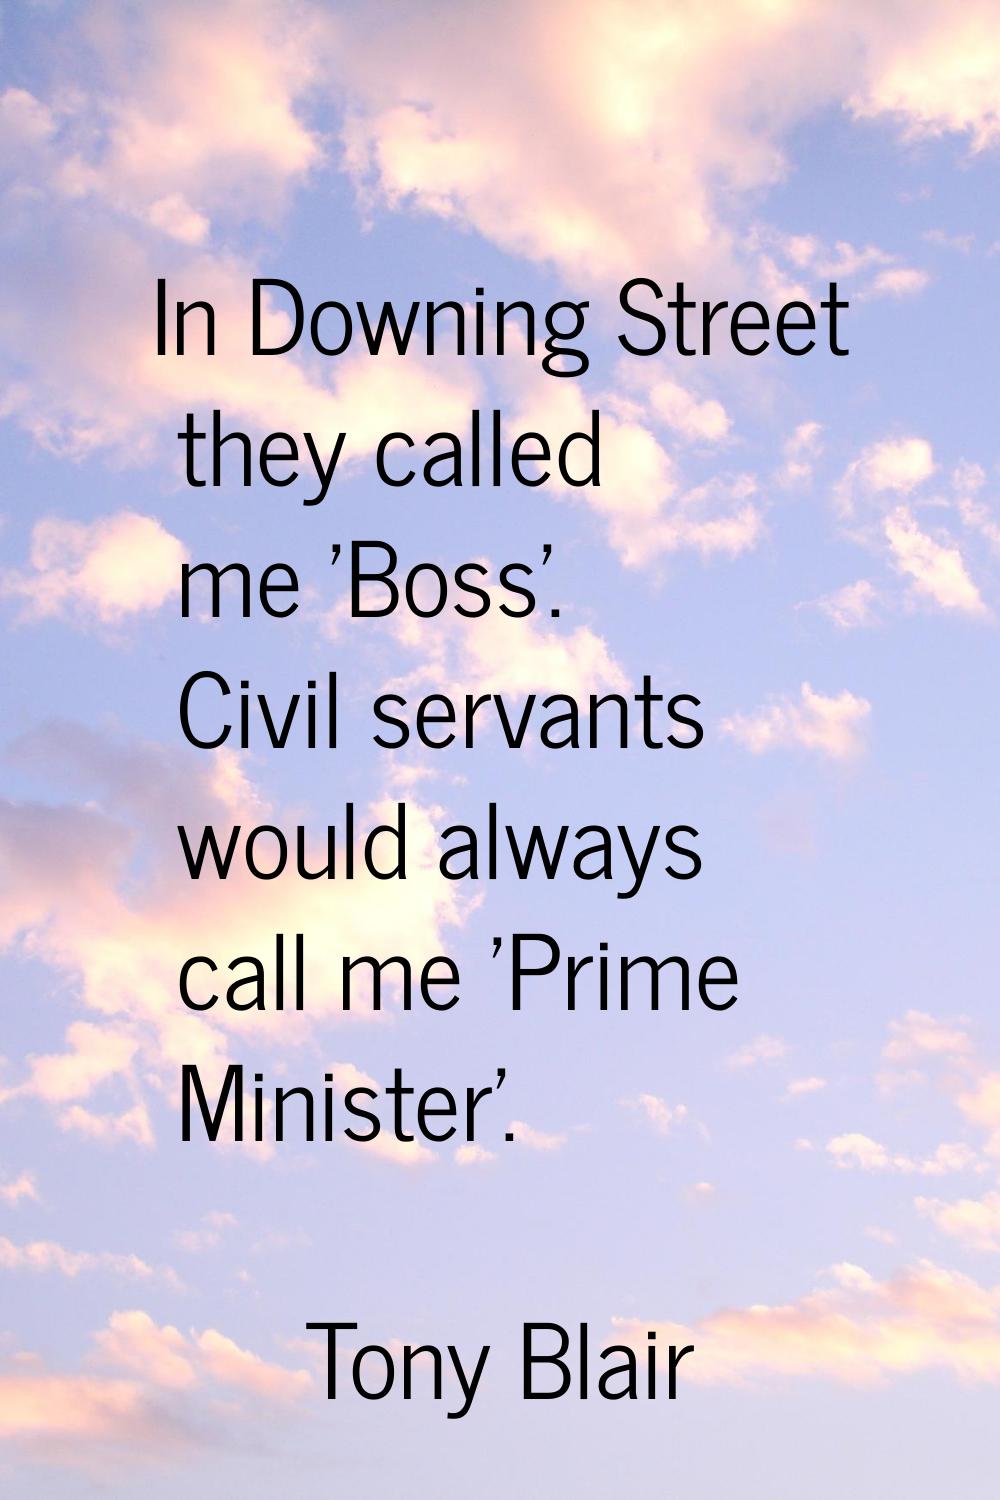 In Downing Street they called me 'Boss'. Civil servants would always call me 'Prime Minister'.